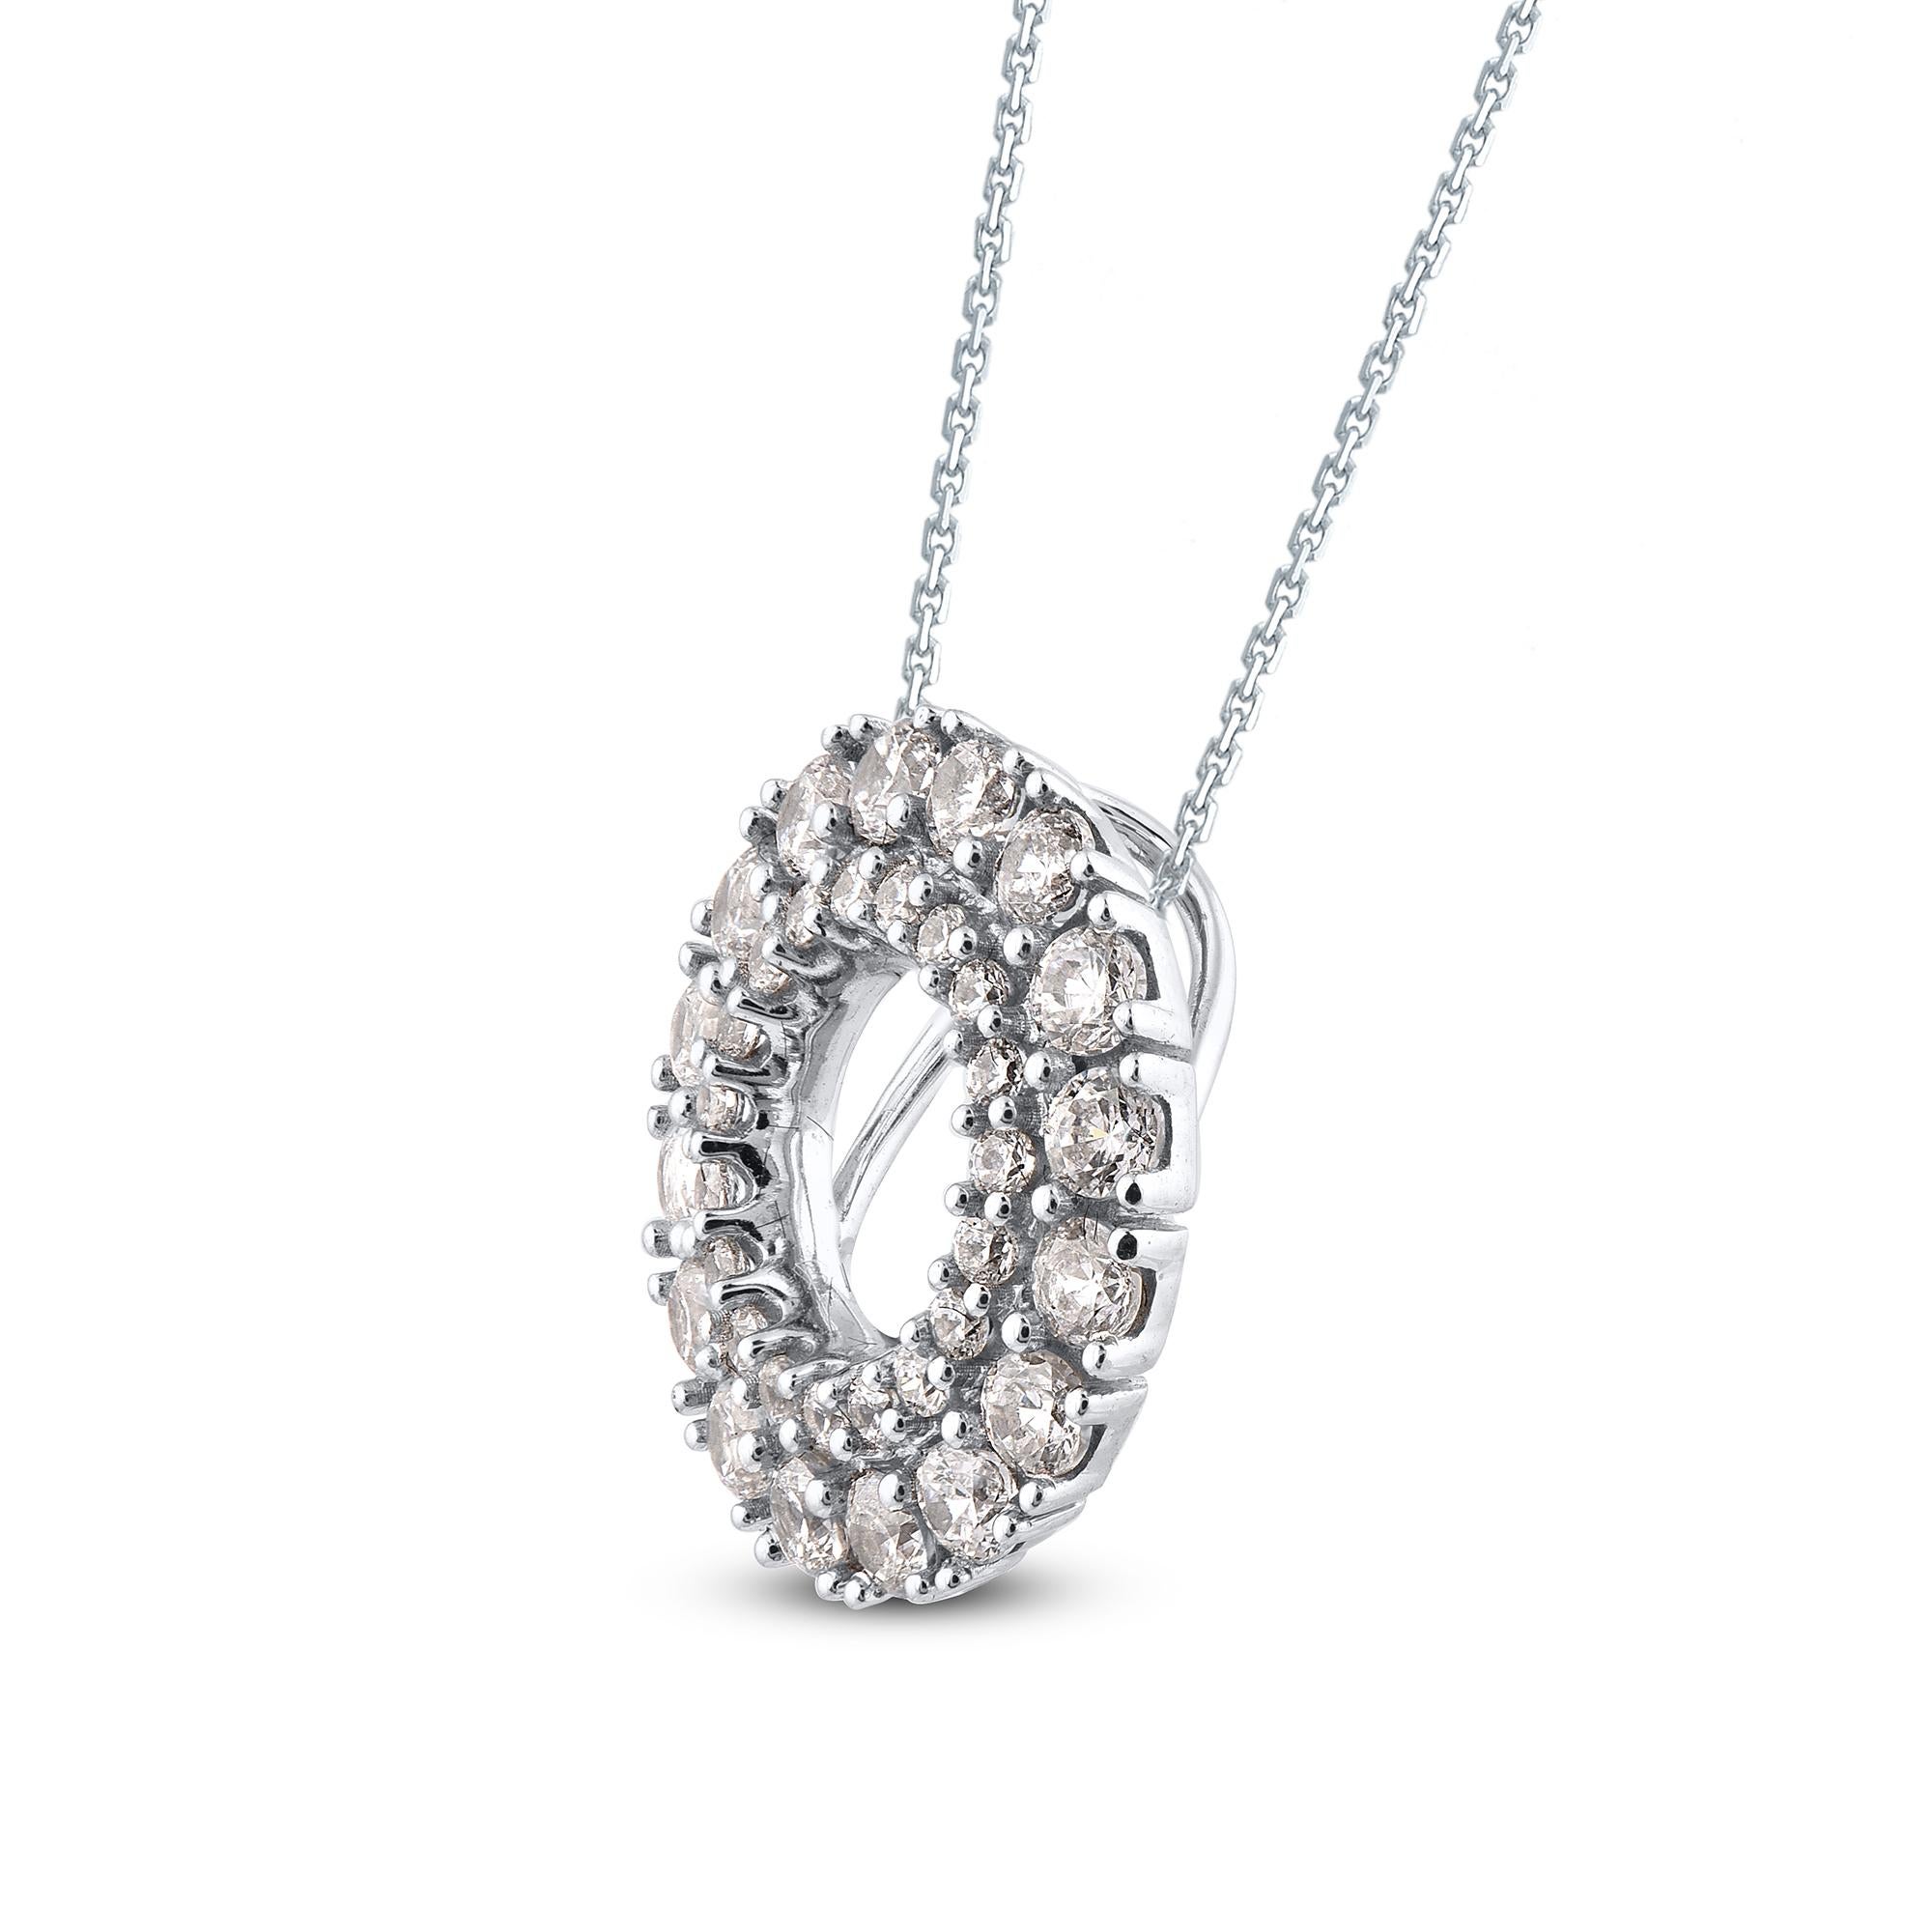 A striking addition when worn on its own, this diamond pendant makes a stunning impression. This circle pendant is crafted from 14-karat white gold and features 35 brilliant cut diamonds set in prong setting. H-I color I2 clarity and a high polish